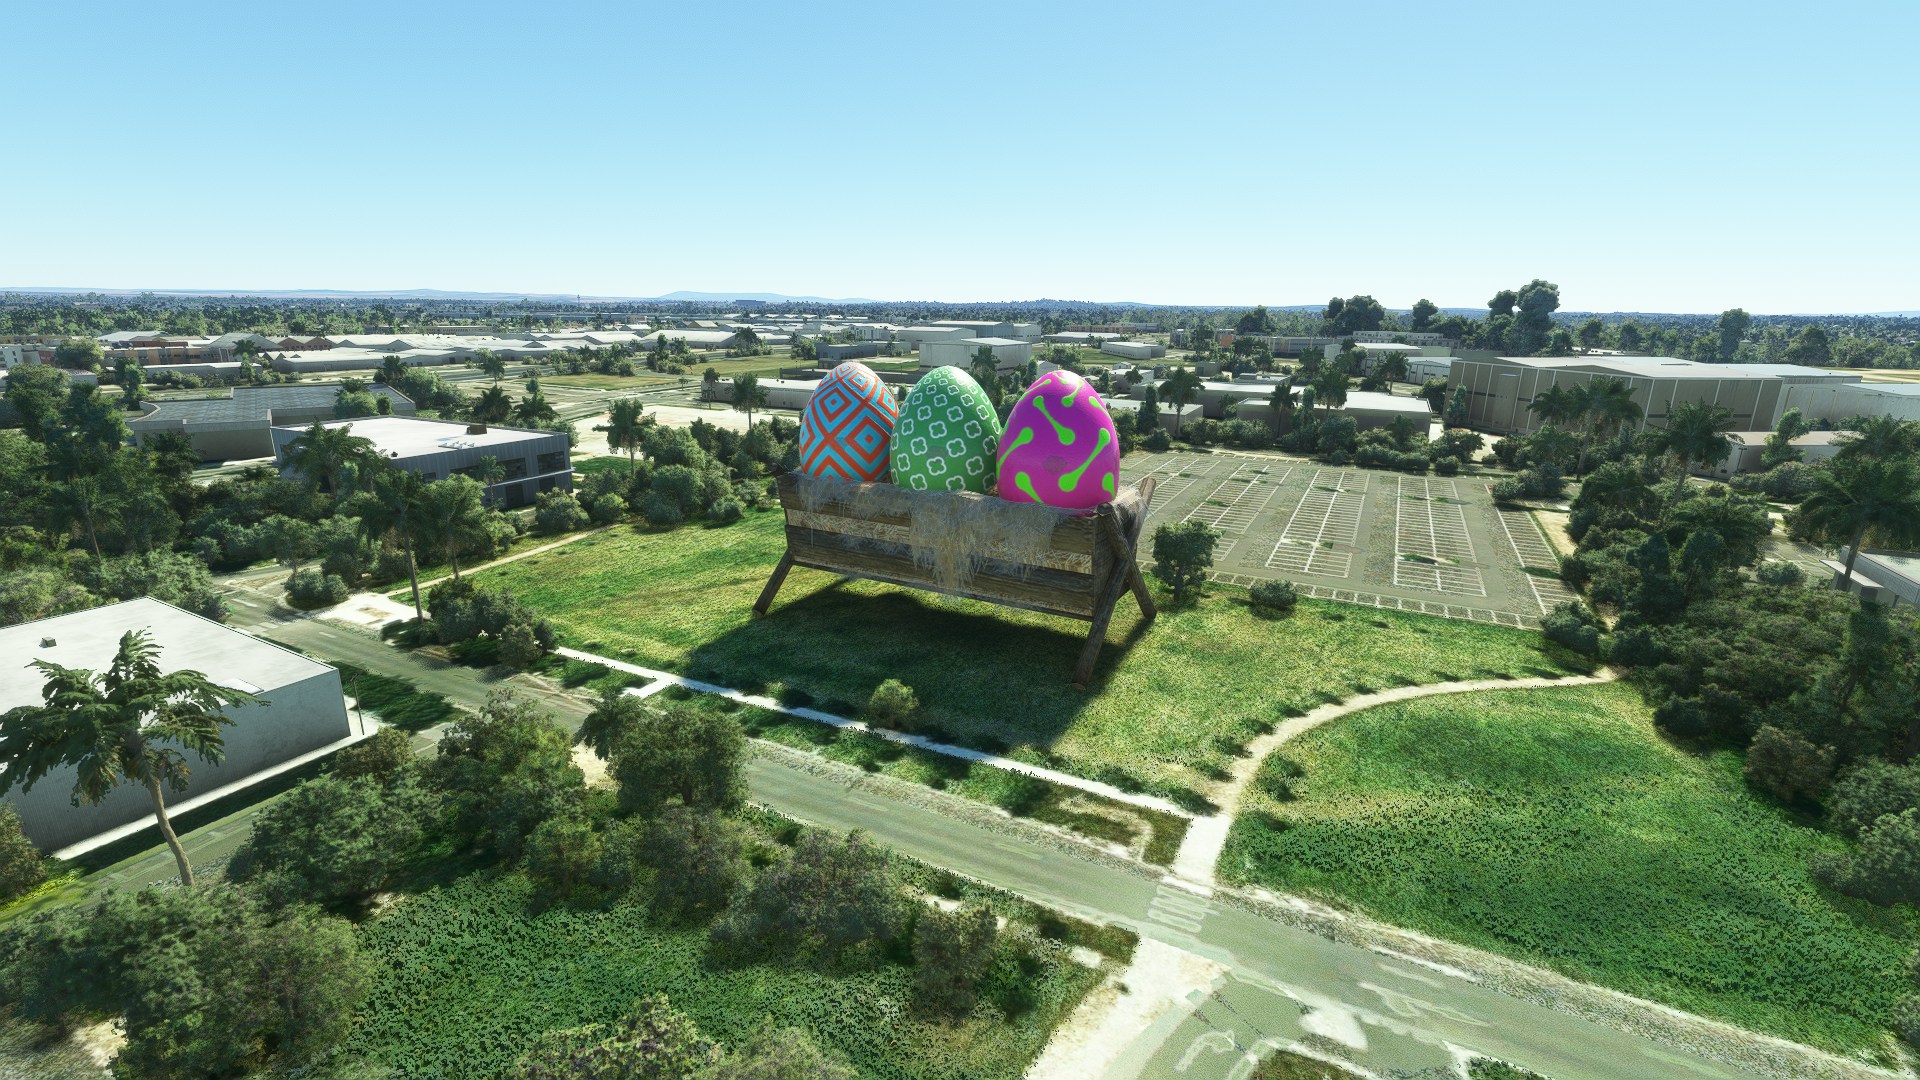 Orbx Sends us on an Easter Egg Hunt Around the World